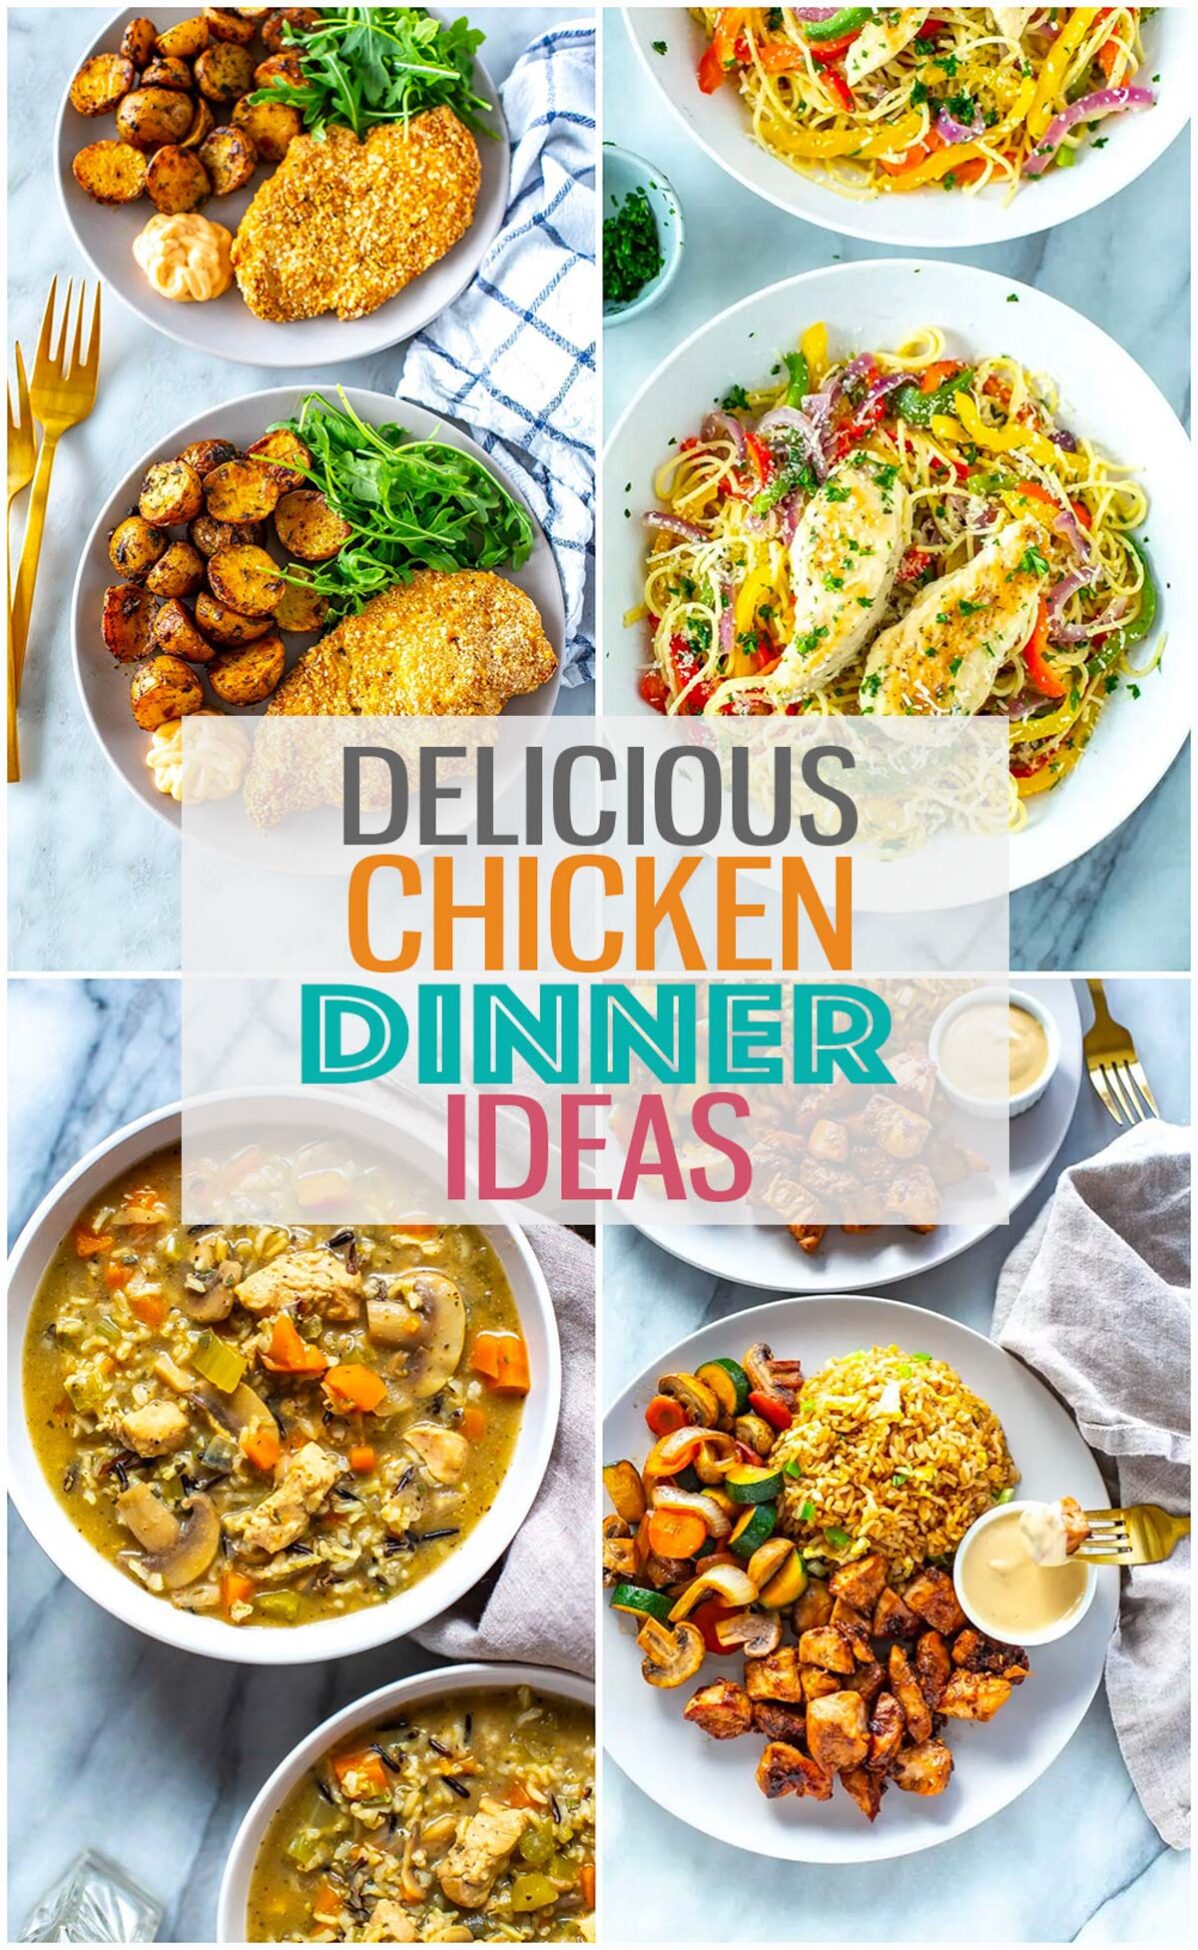 A collage of 4 different chicken dinner ideas with the text "Delicious Chicken Dinner Ideas" layered on top.